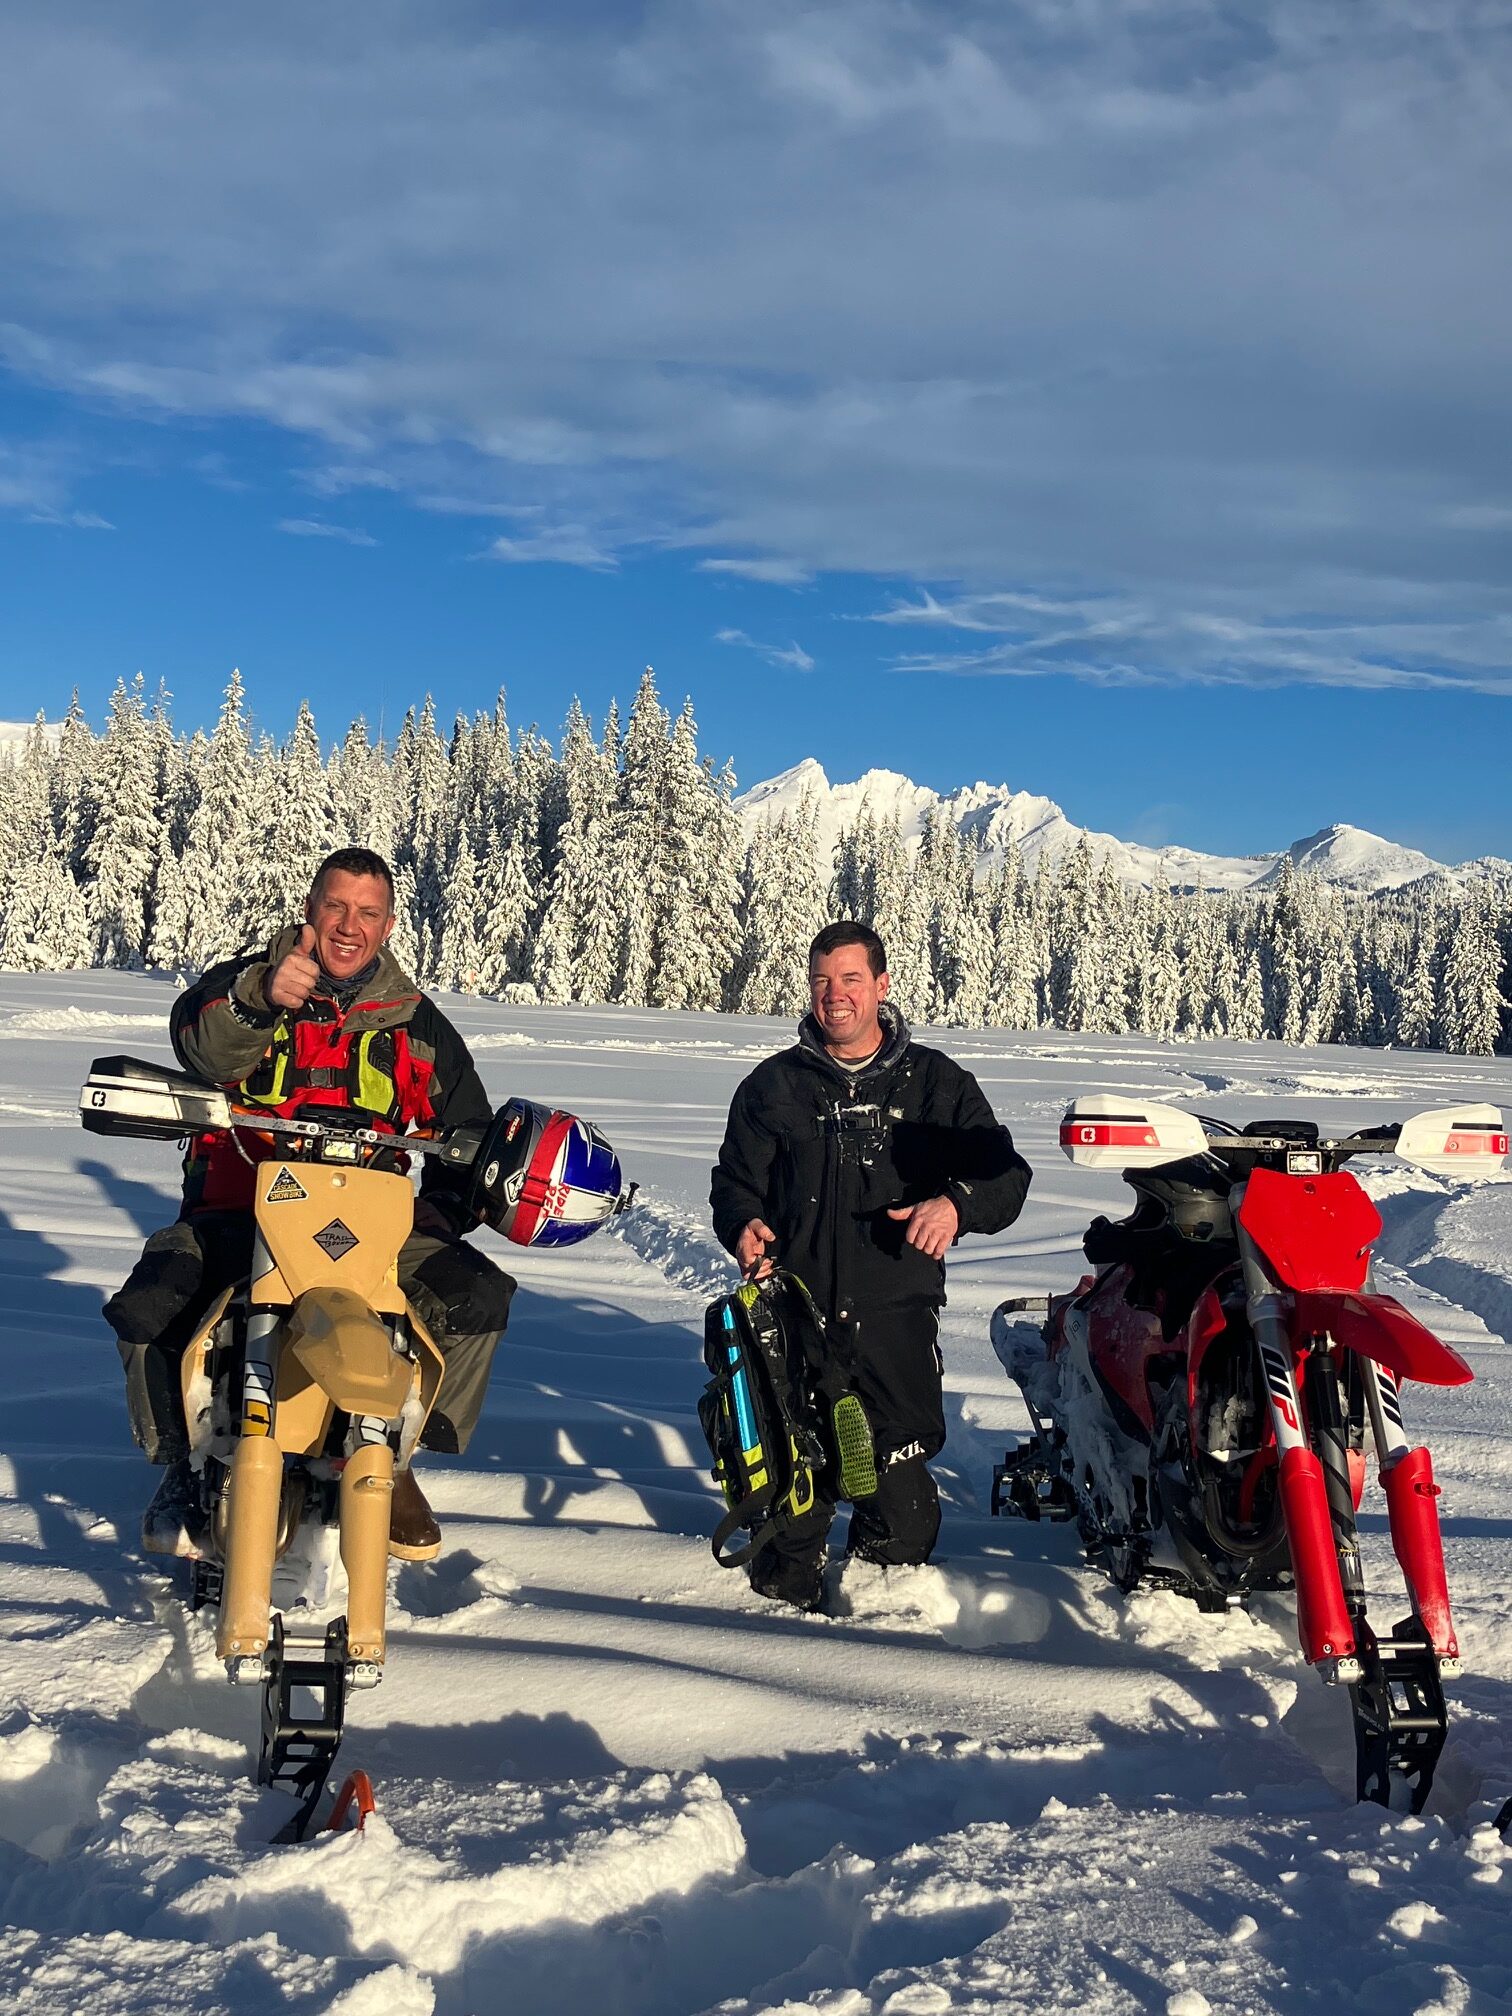 Vacation to snow bike